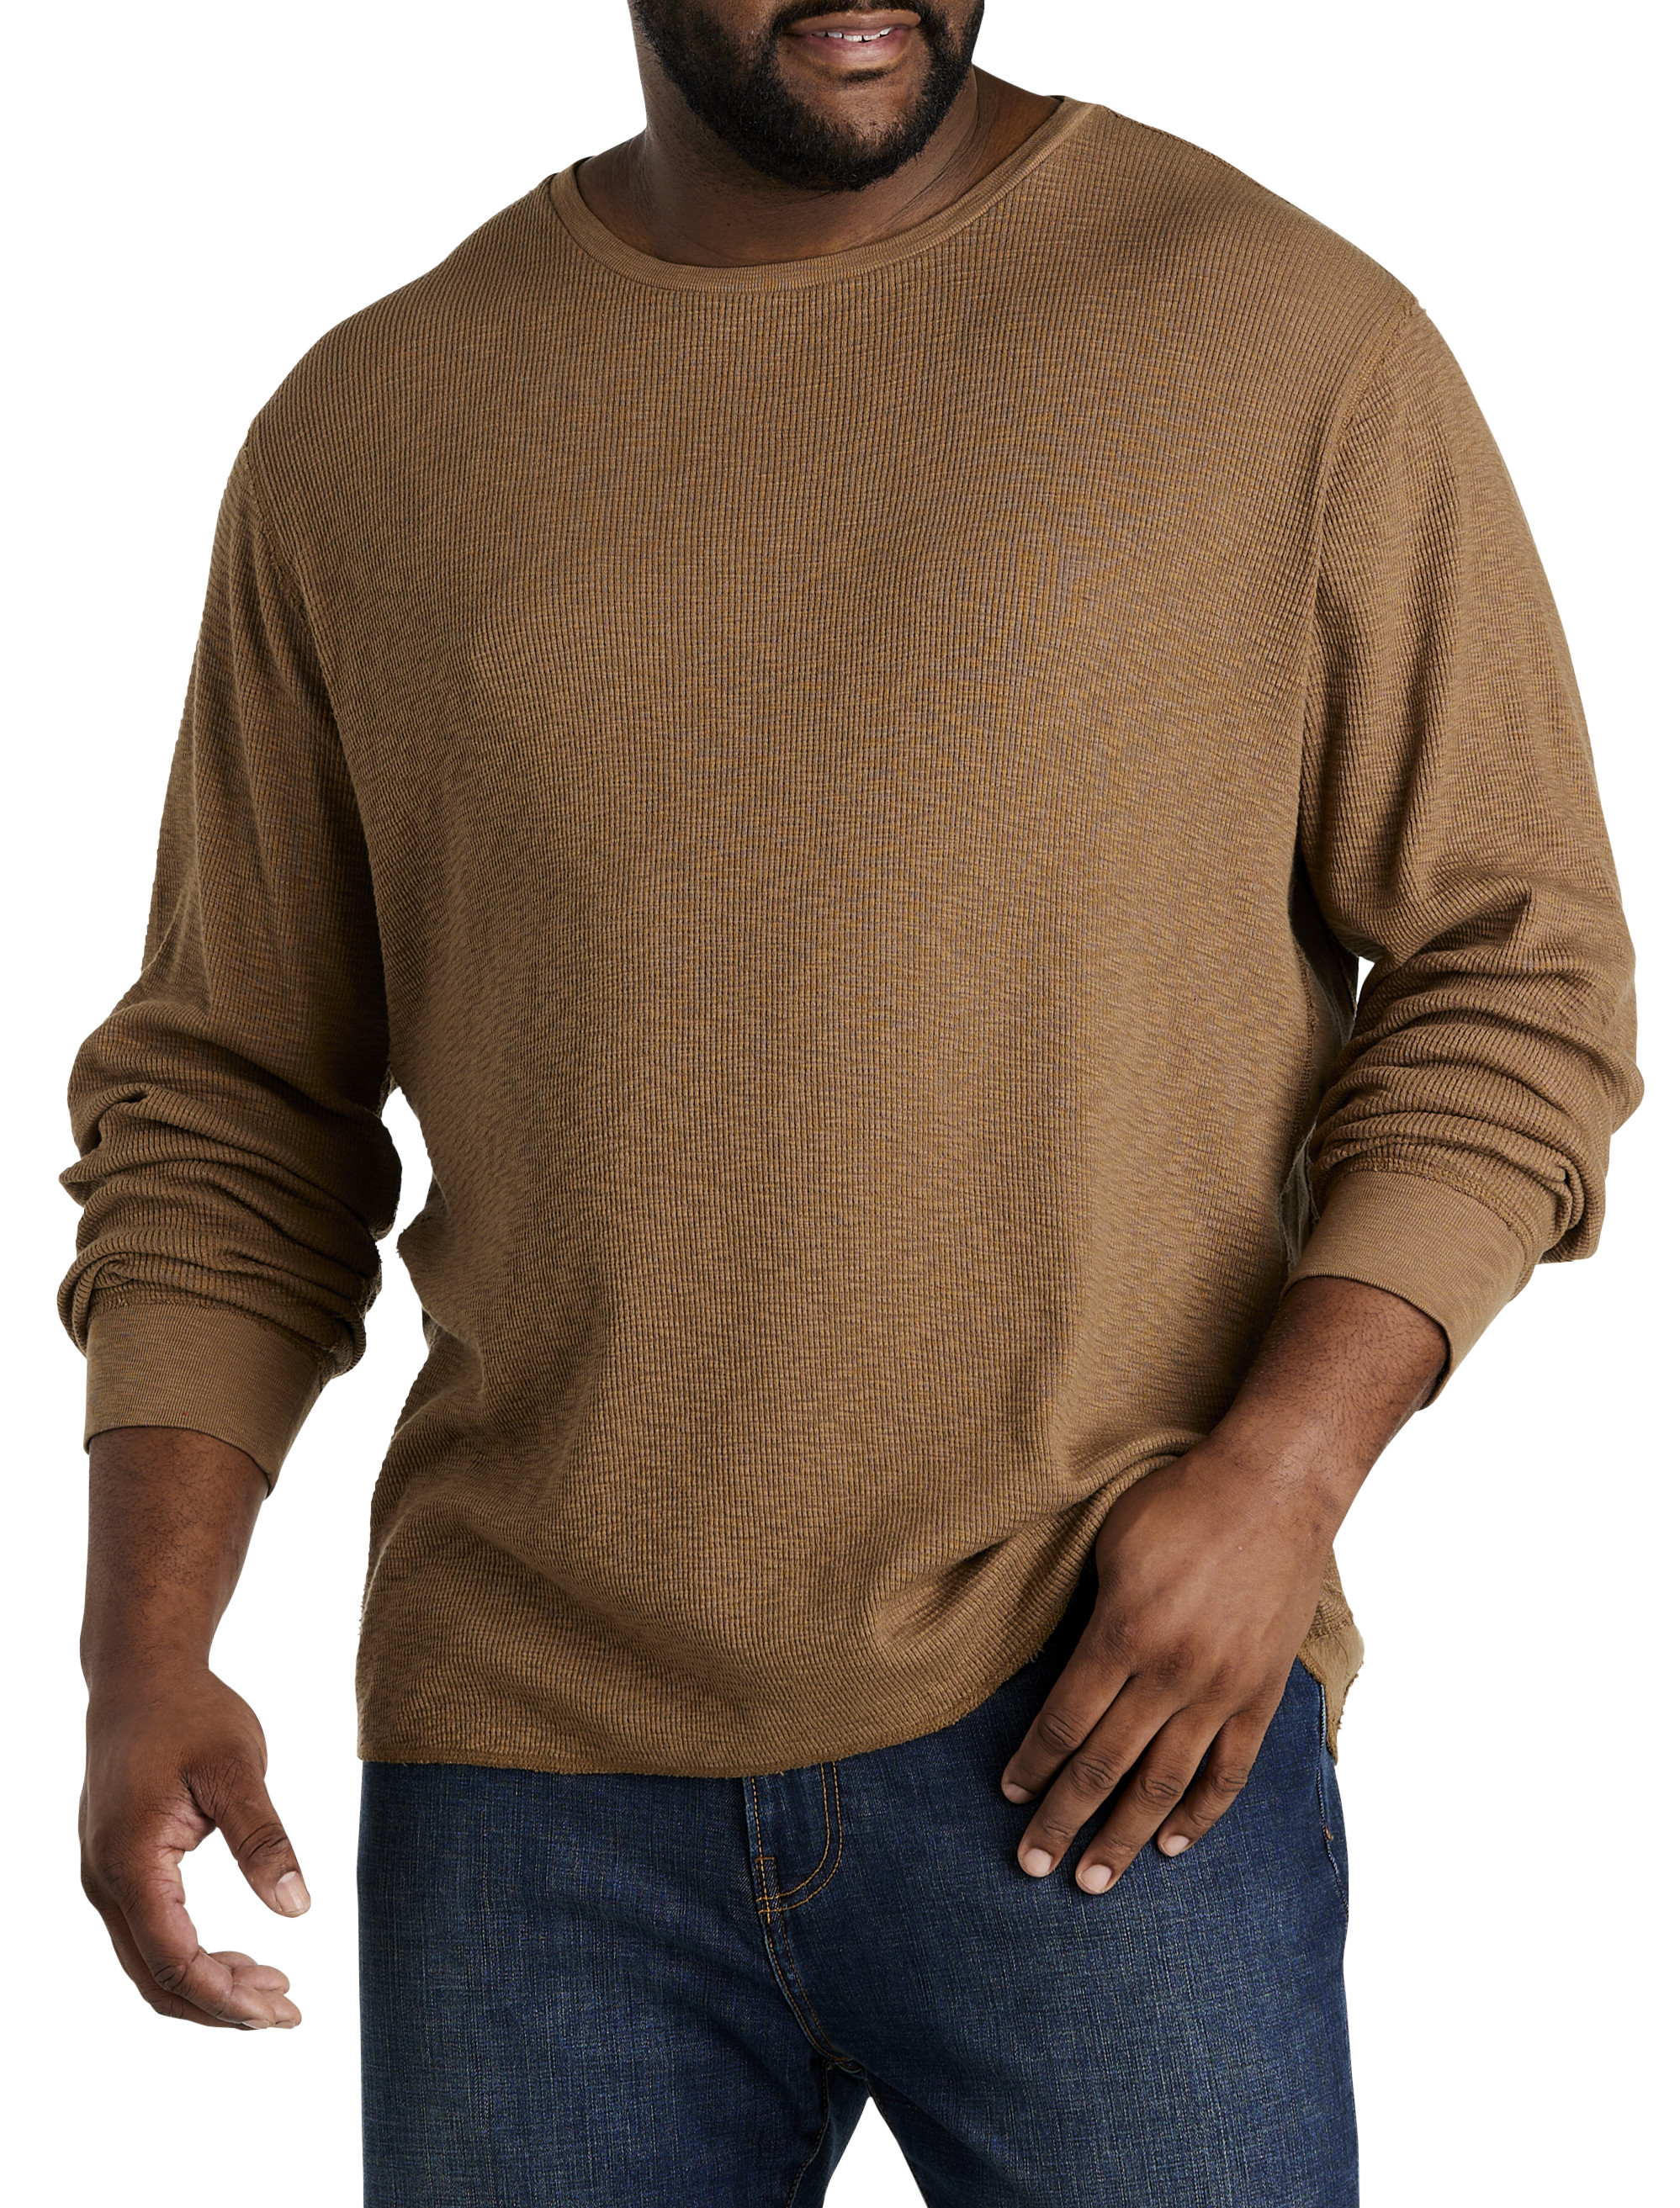 Lucky Brand Waffle Knit Knit Tops